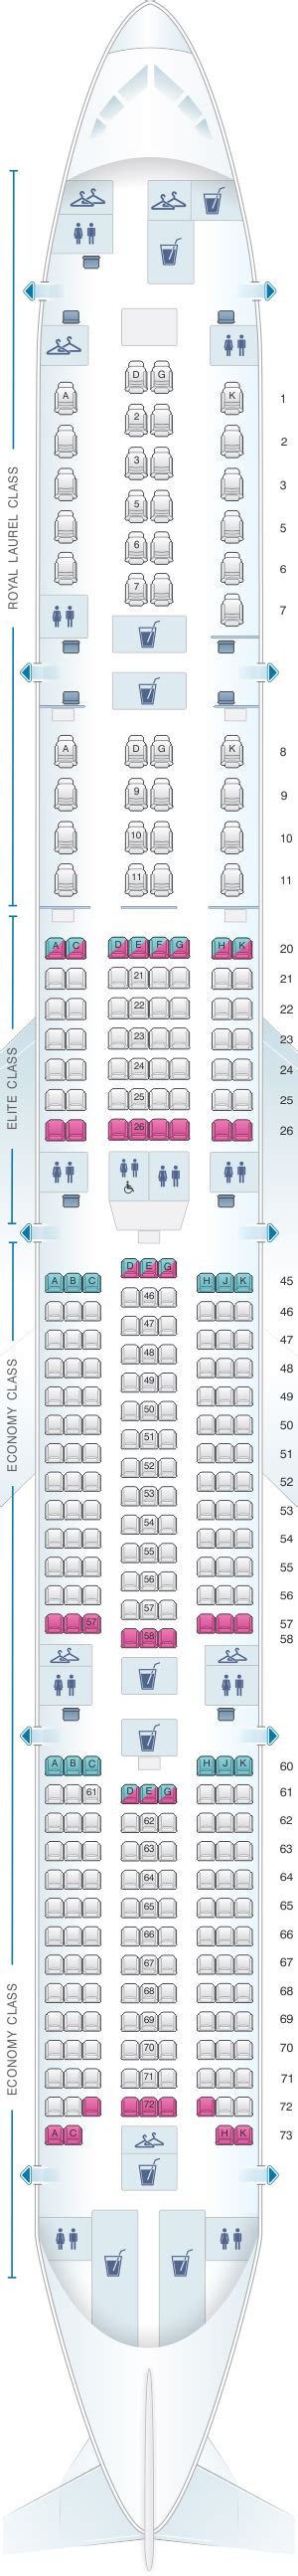 Eva air seat map. Traveling by air can be a hassle, but booking your flight doesn’t have to be. Delta Air Lines makes it easy to make a reservation quickly and easily. Here are some tips for reserving your seat on a Delta flight. 